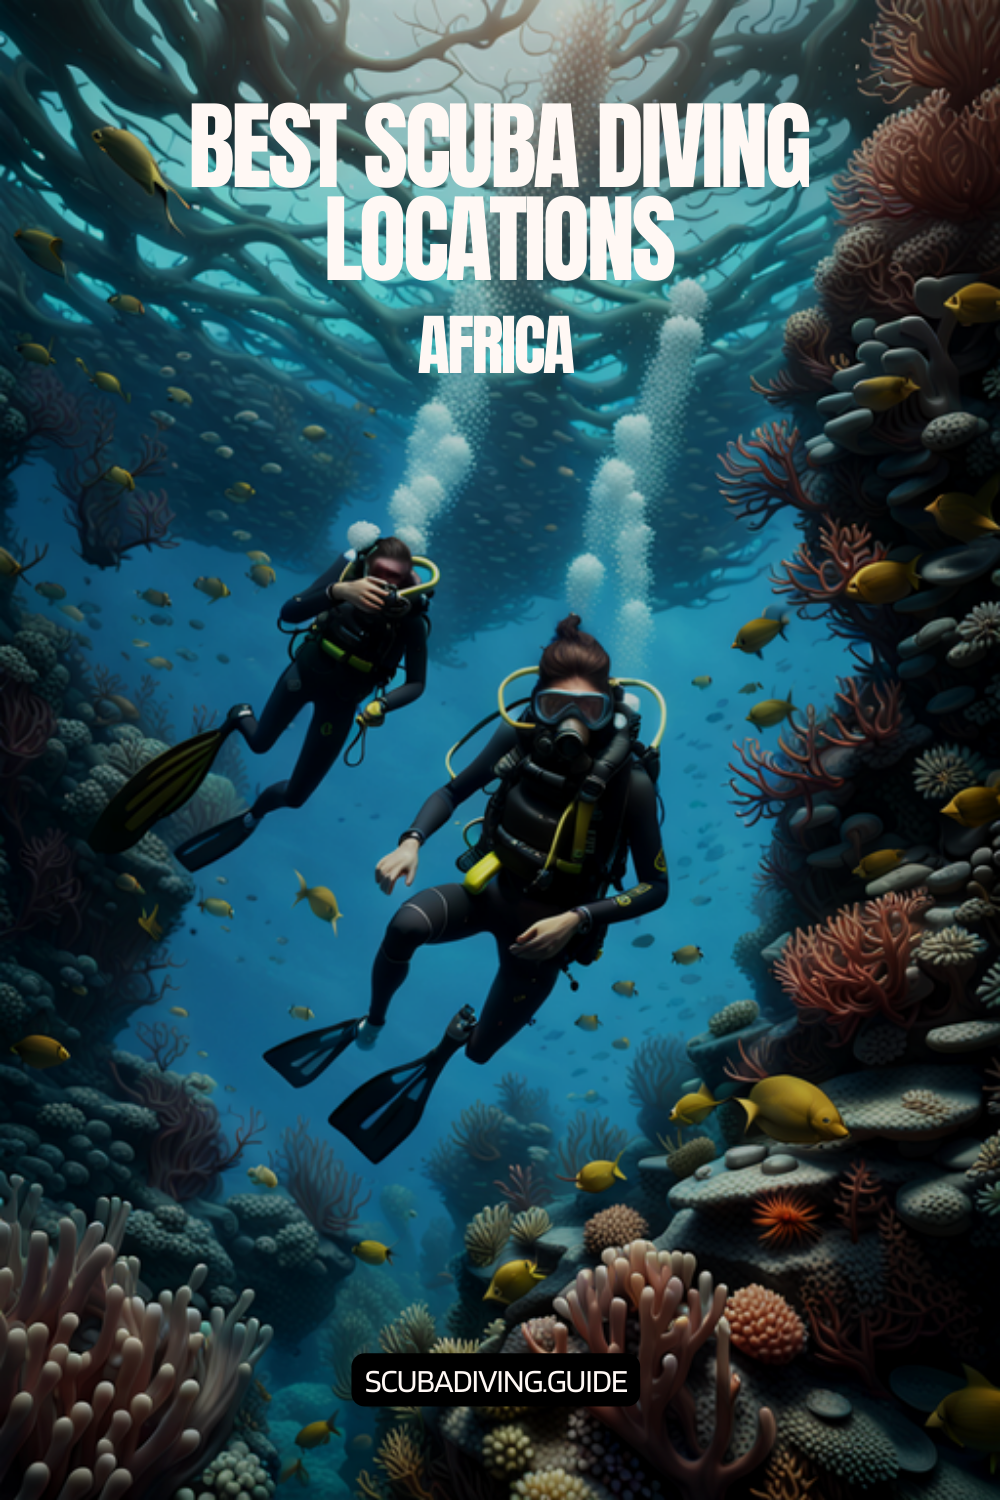 Scuba Diving Locations in Africa